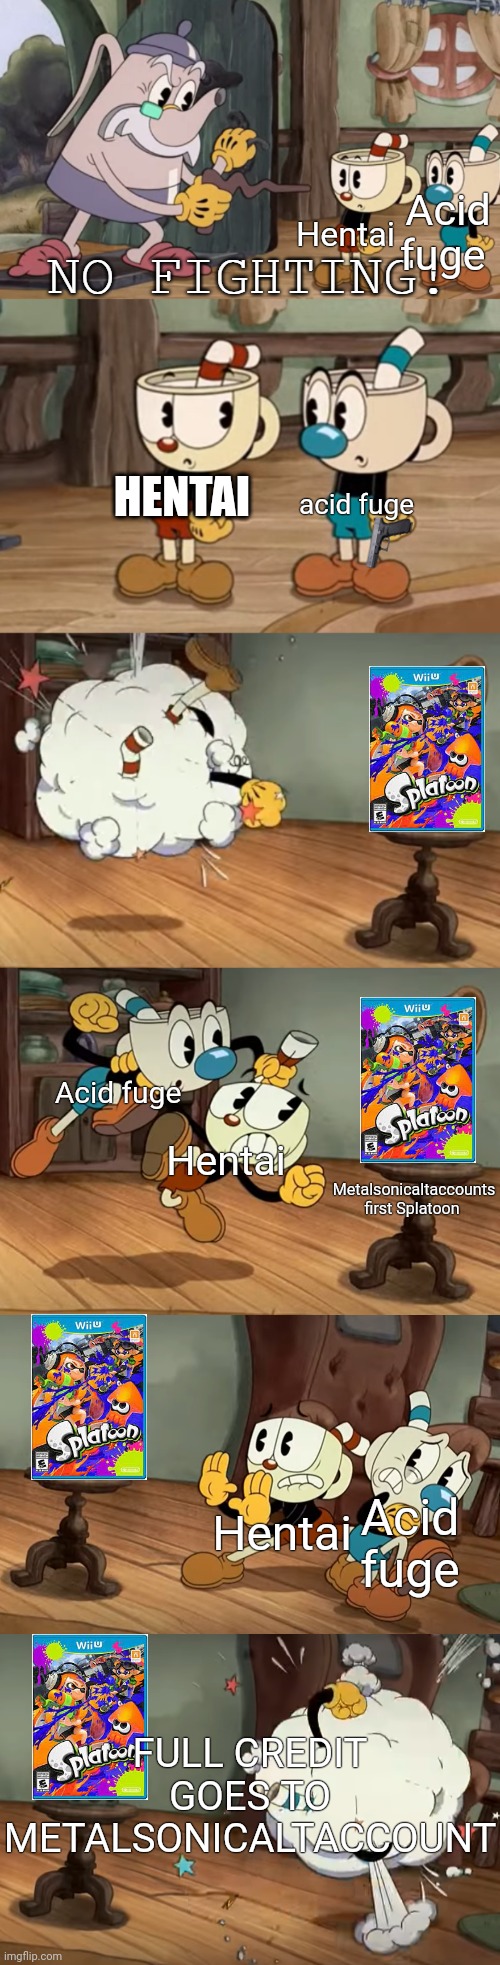 Full credit goes to metalsonicaltaccounts meme | Acid fuge; Hentai; HENTAI; acid fuge; Acid fuge; Metalsonicaltaccounts first Splatoon; Hentai; Acid fuge; Hentai; FULL CREDIT GOES TO METALSONICALTACCOUNT | image tagged in cuphead show no fighting | made w/ Imgflip meme maker